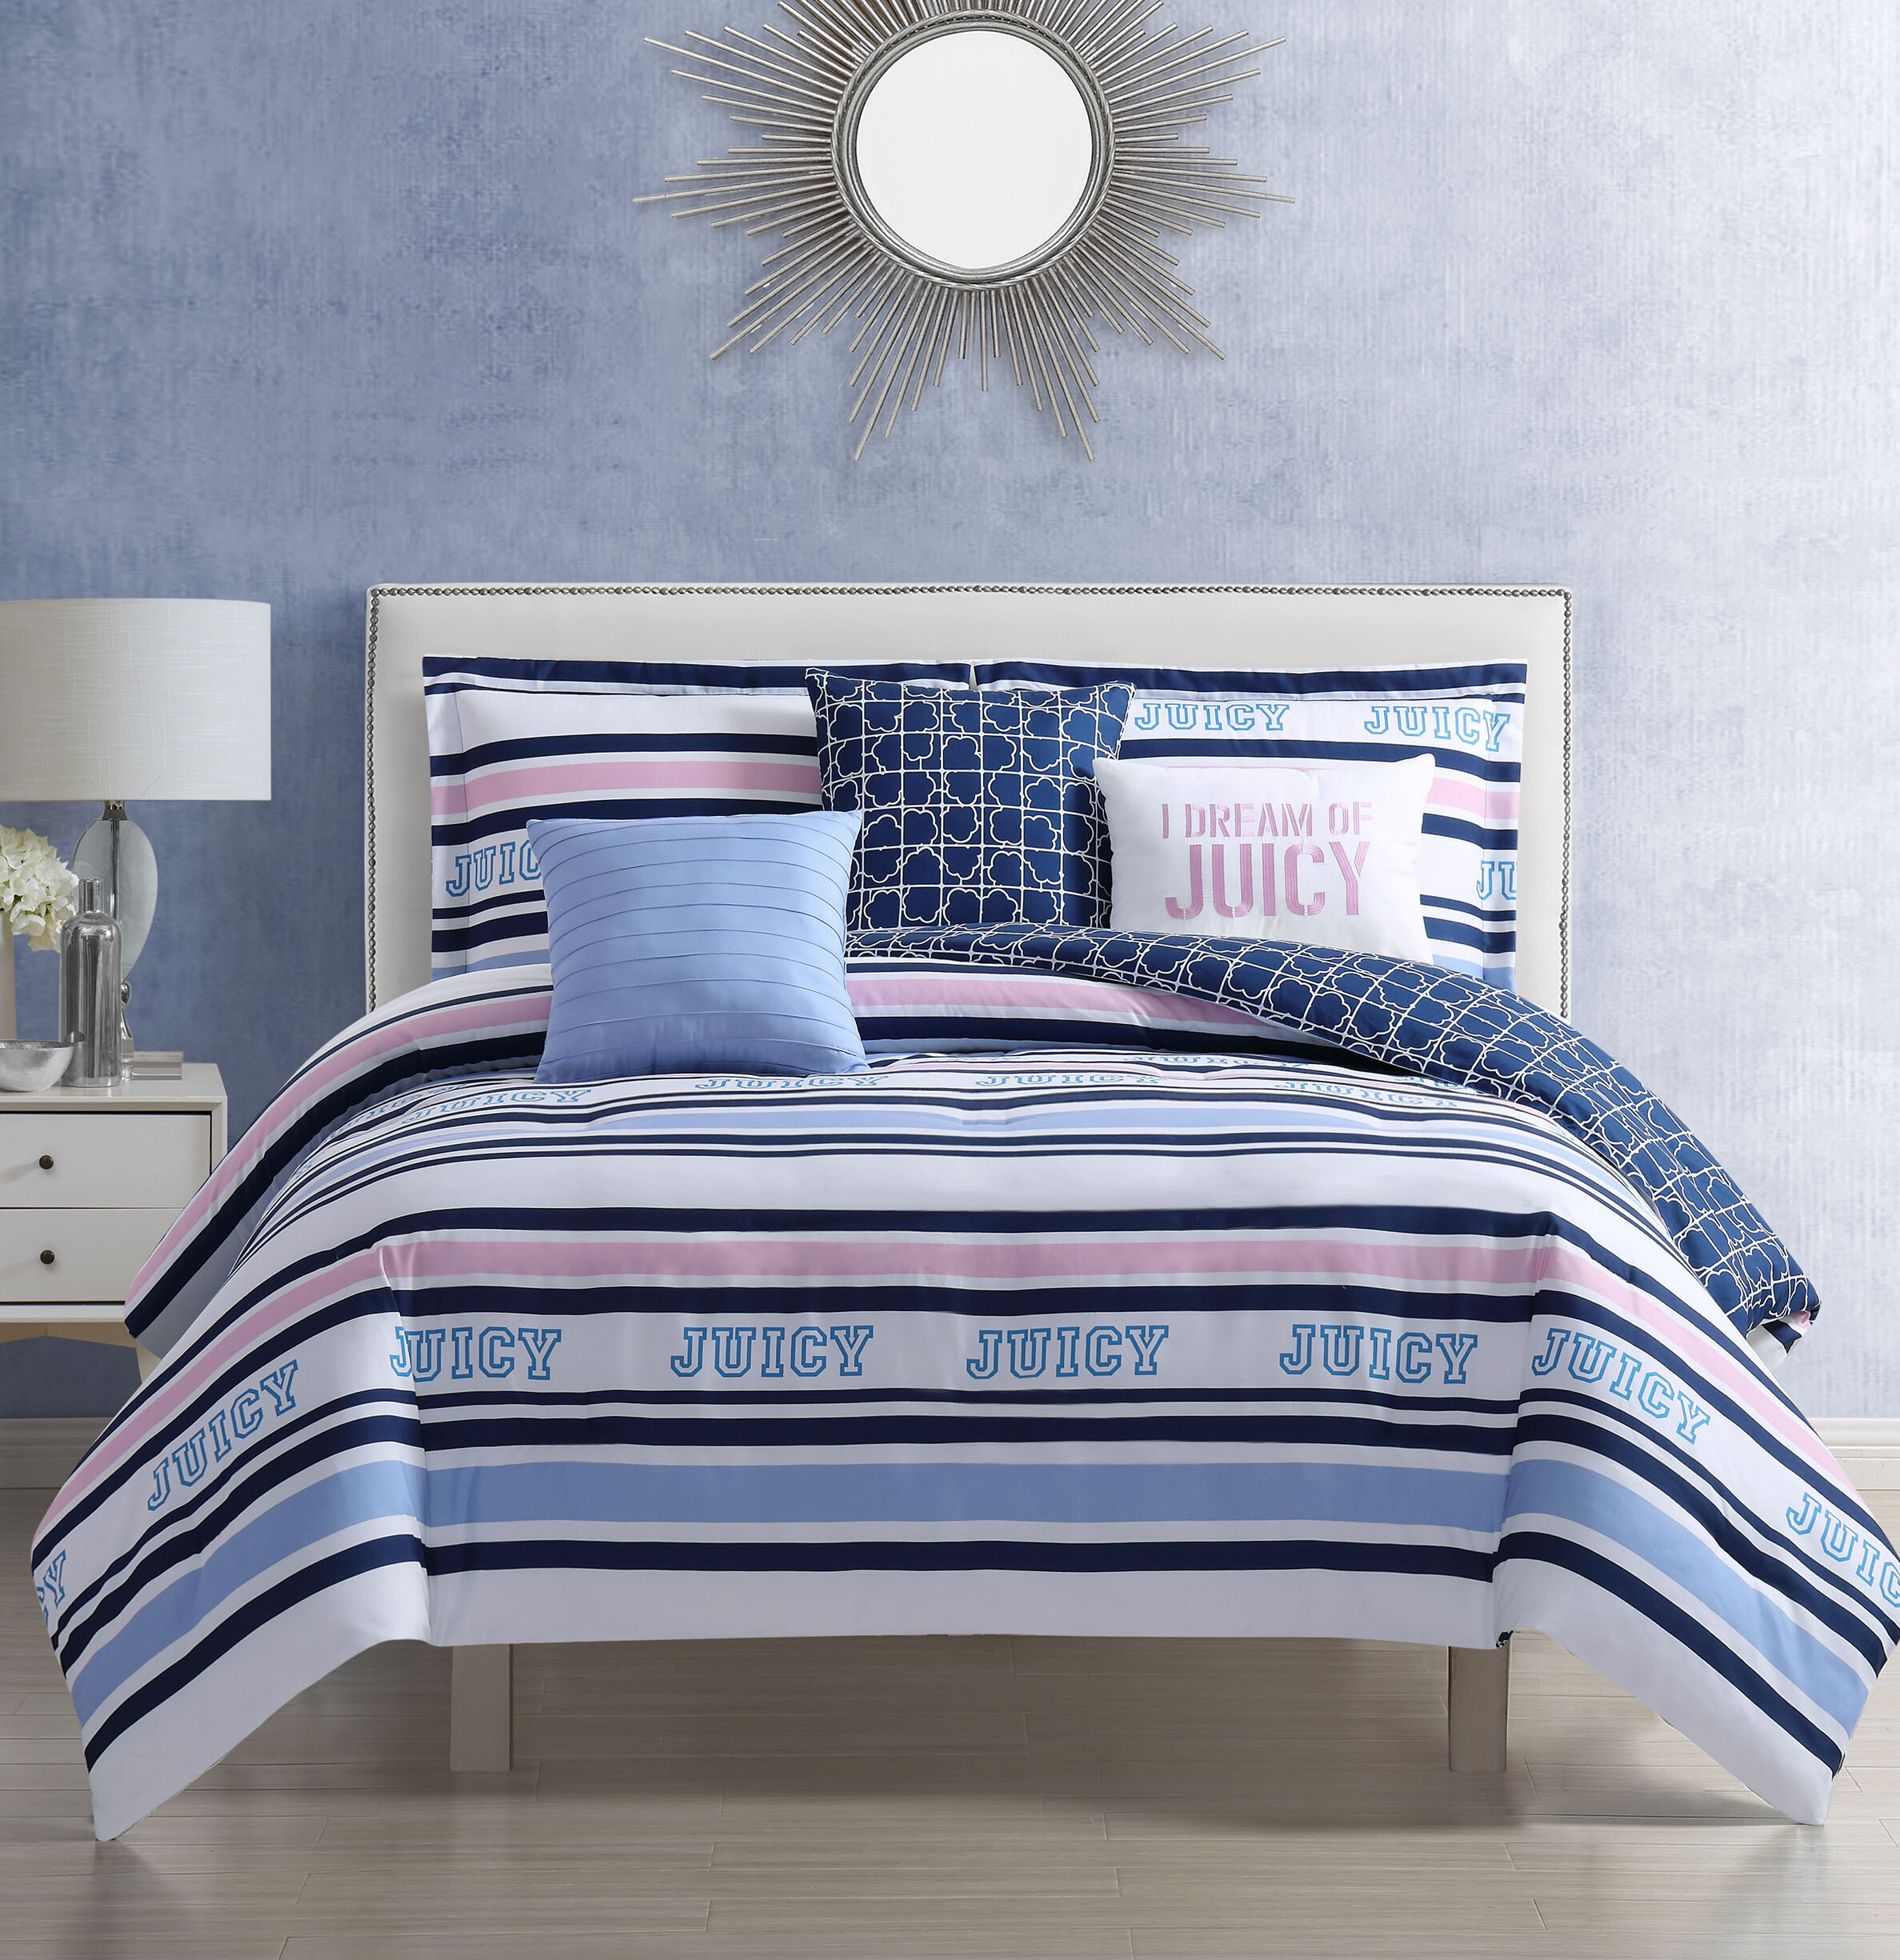 Details about   Juicy Couture Comforter Set Stripe Chic Reversible Blue White Red King Queen 